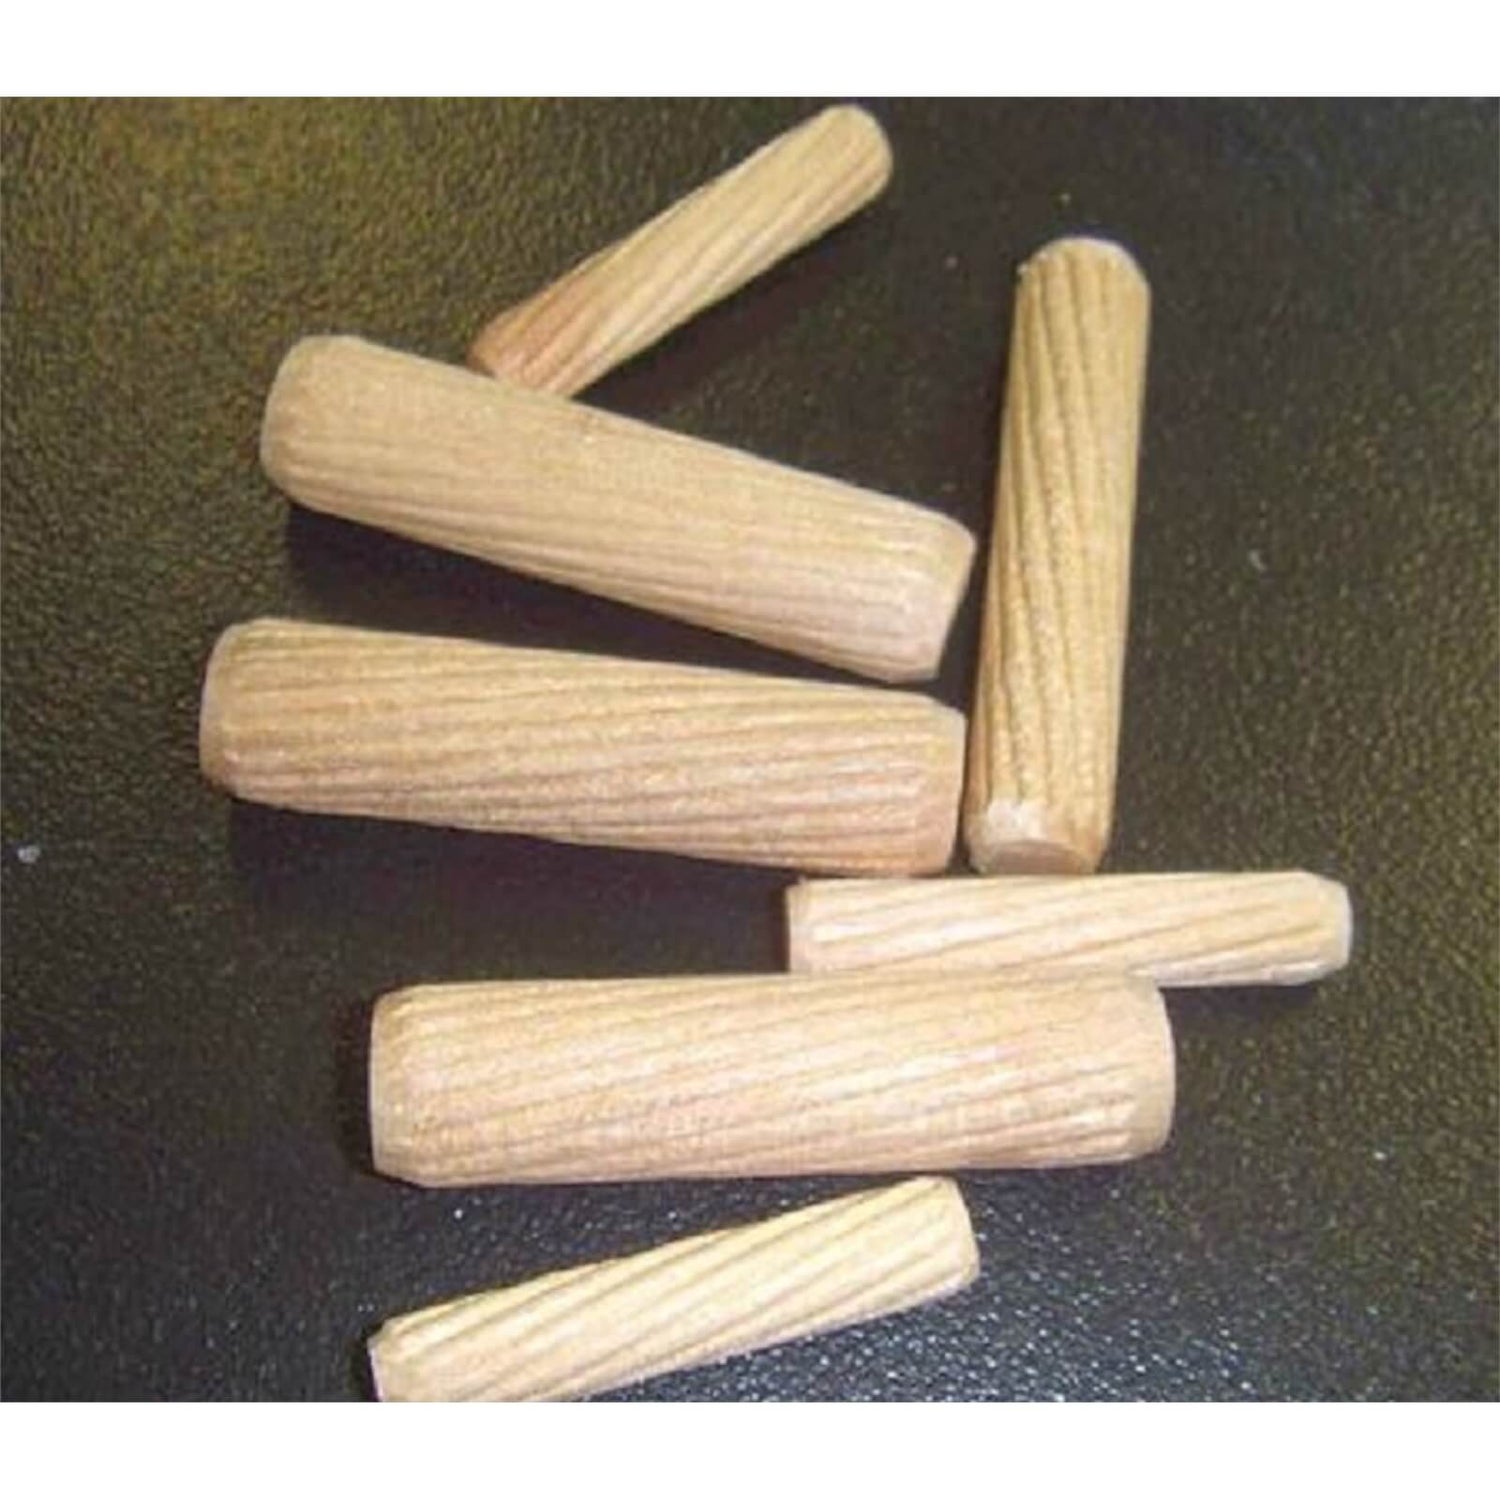 Assorted Wooden Dowels 60 Pack Homebase, Wooden Dowels For Bunk Beds